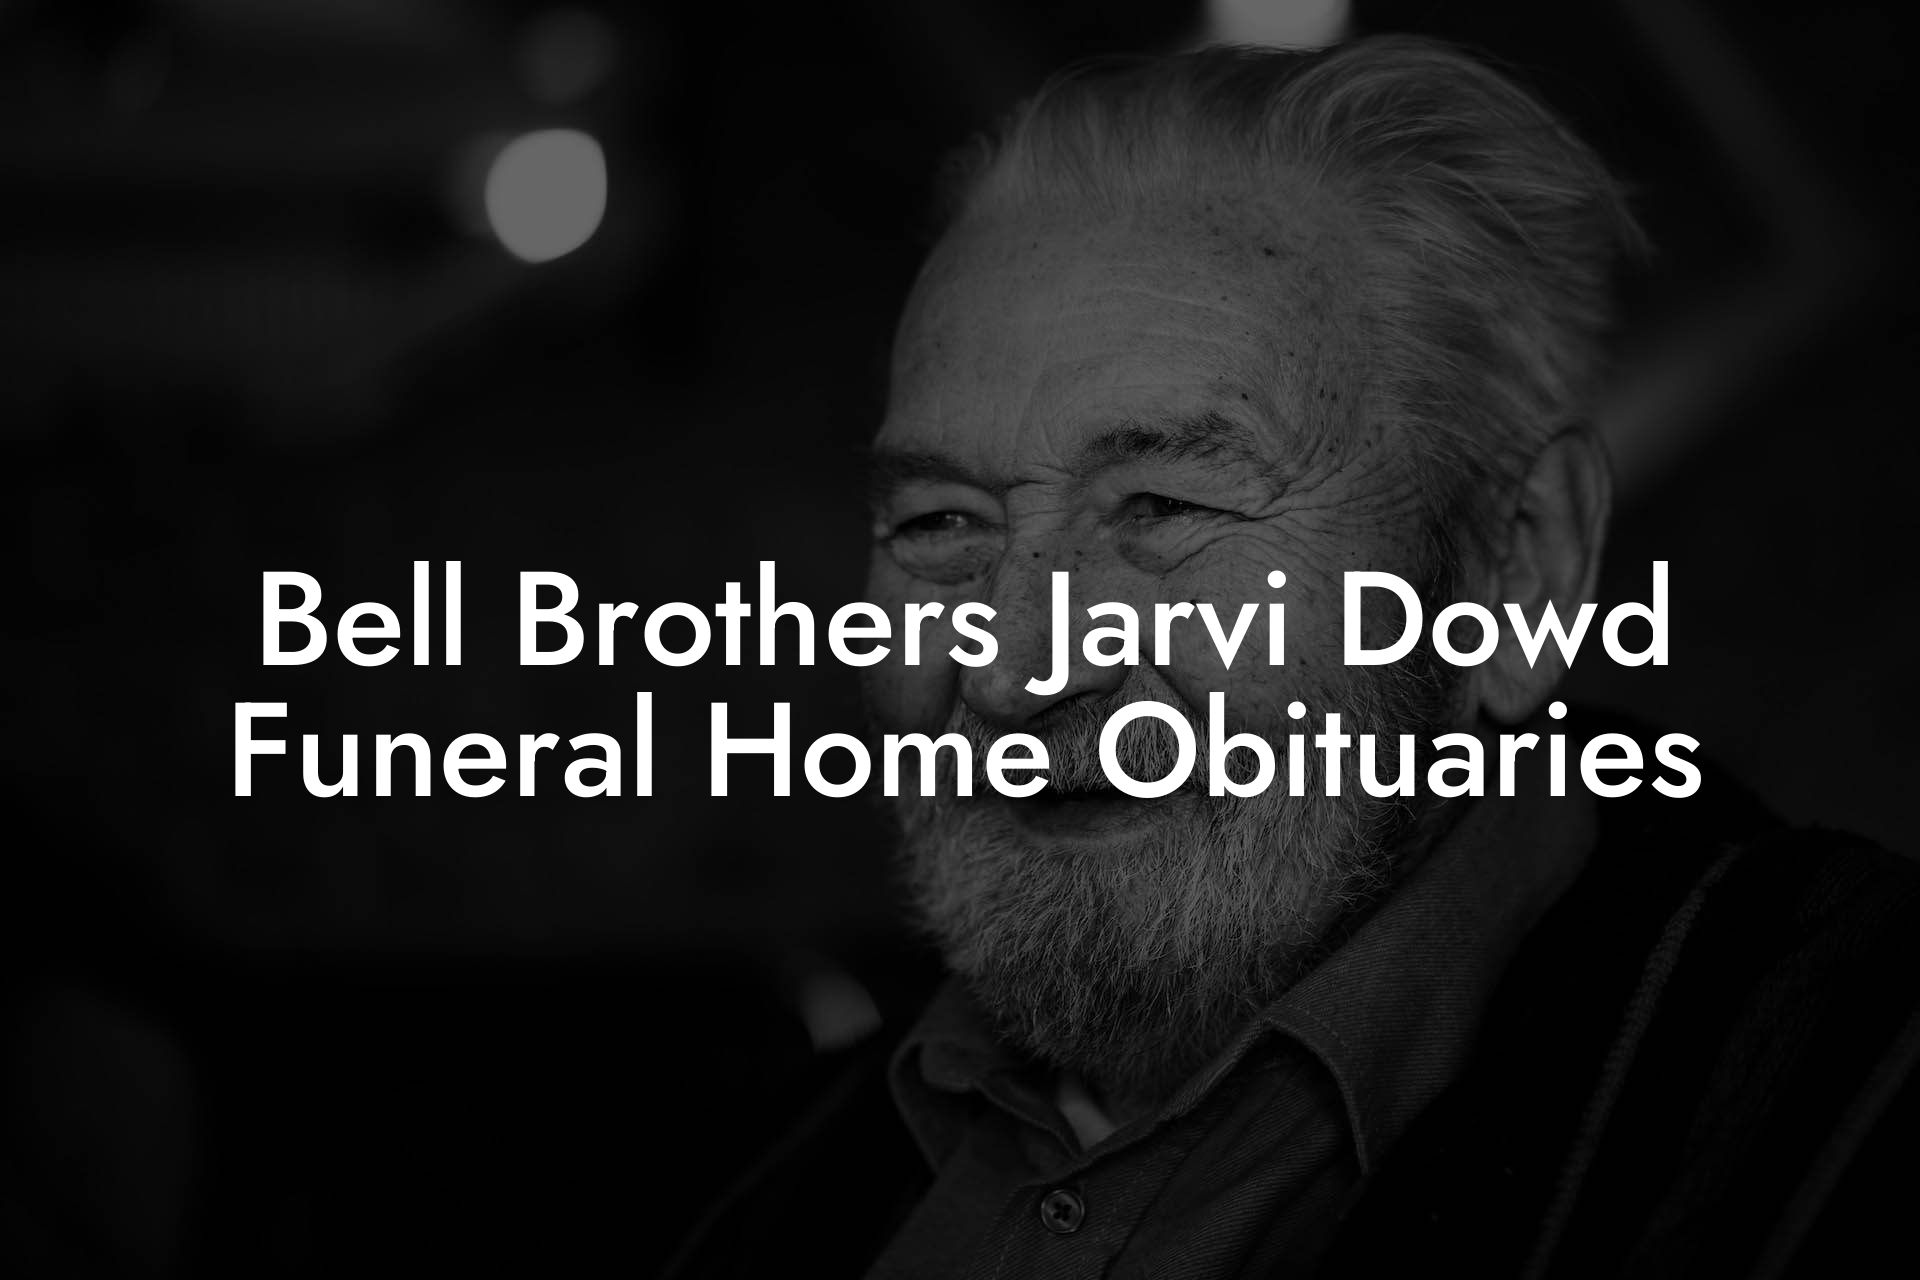 Bell Brothers Jarvi Dowd Funeral Home Obituaries